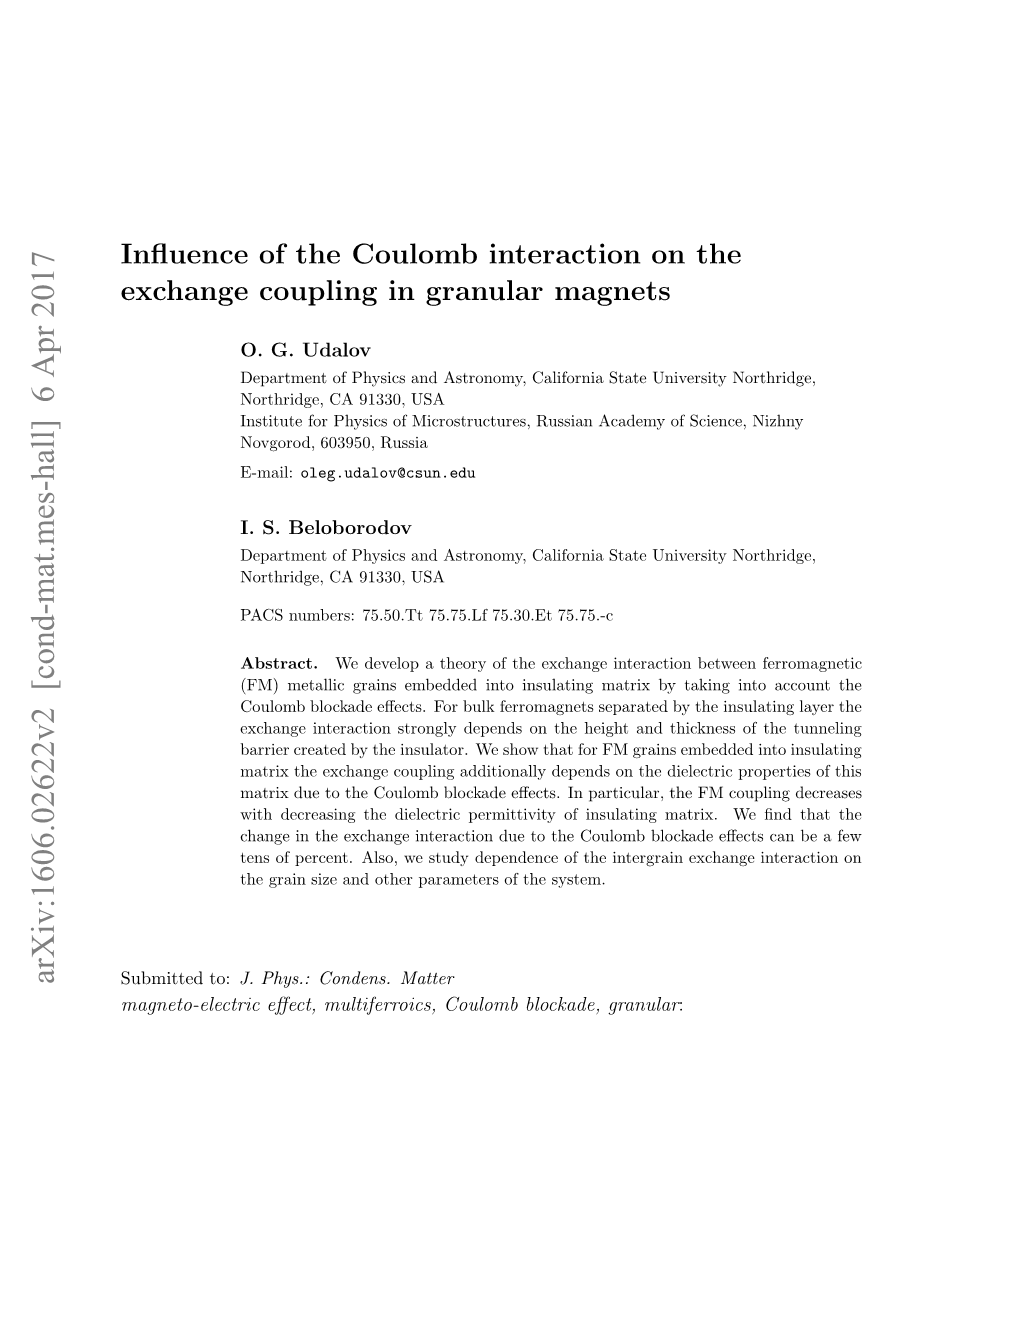 Influence of the Coulomb Interaction on the Exchange Coupling In